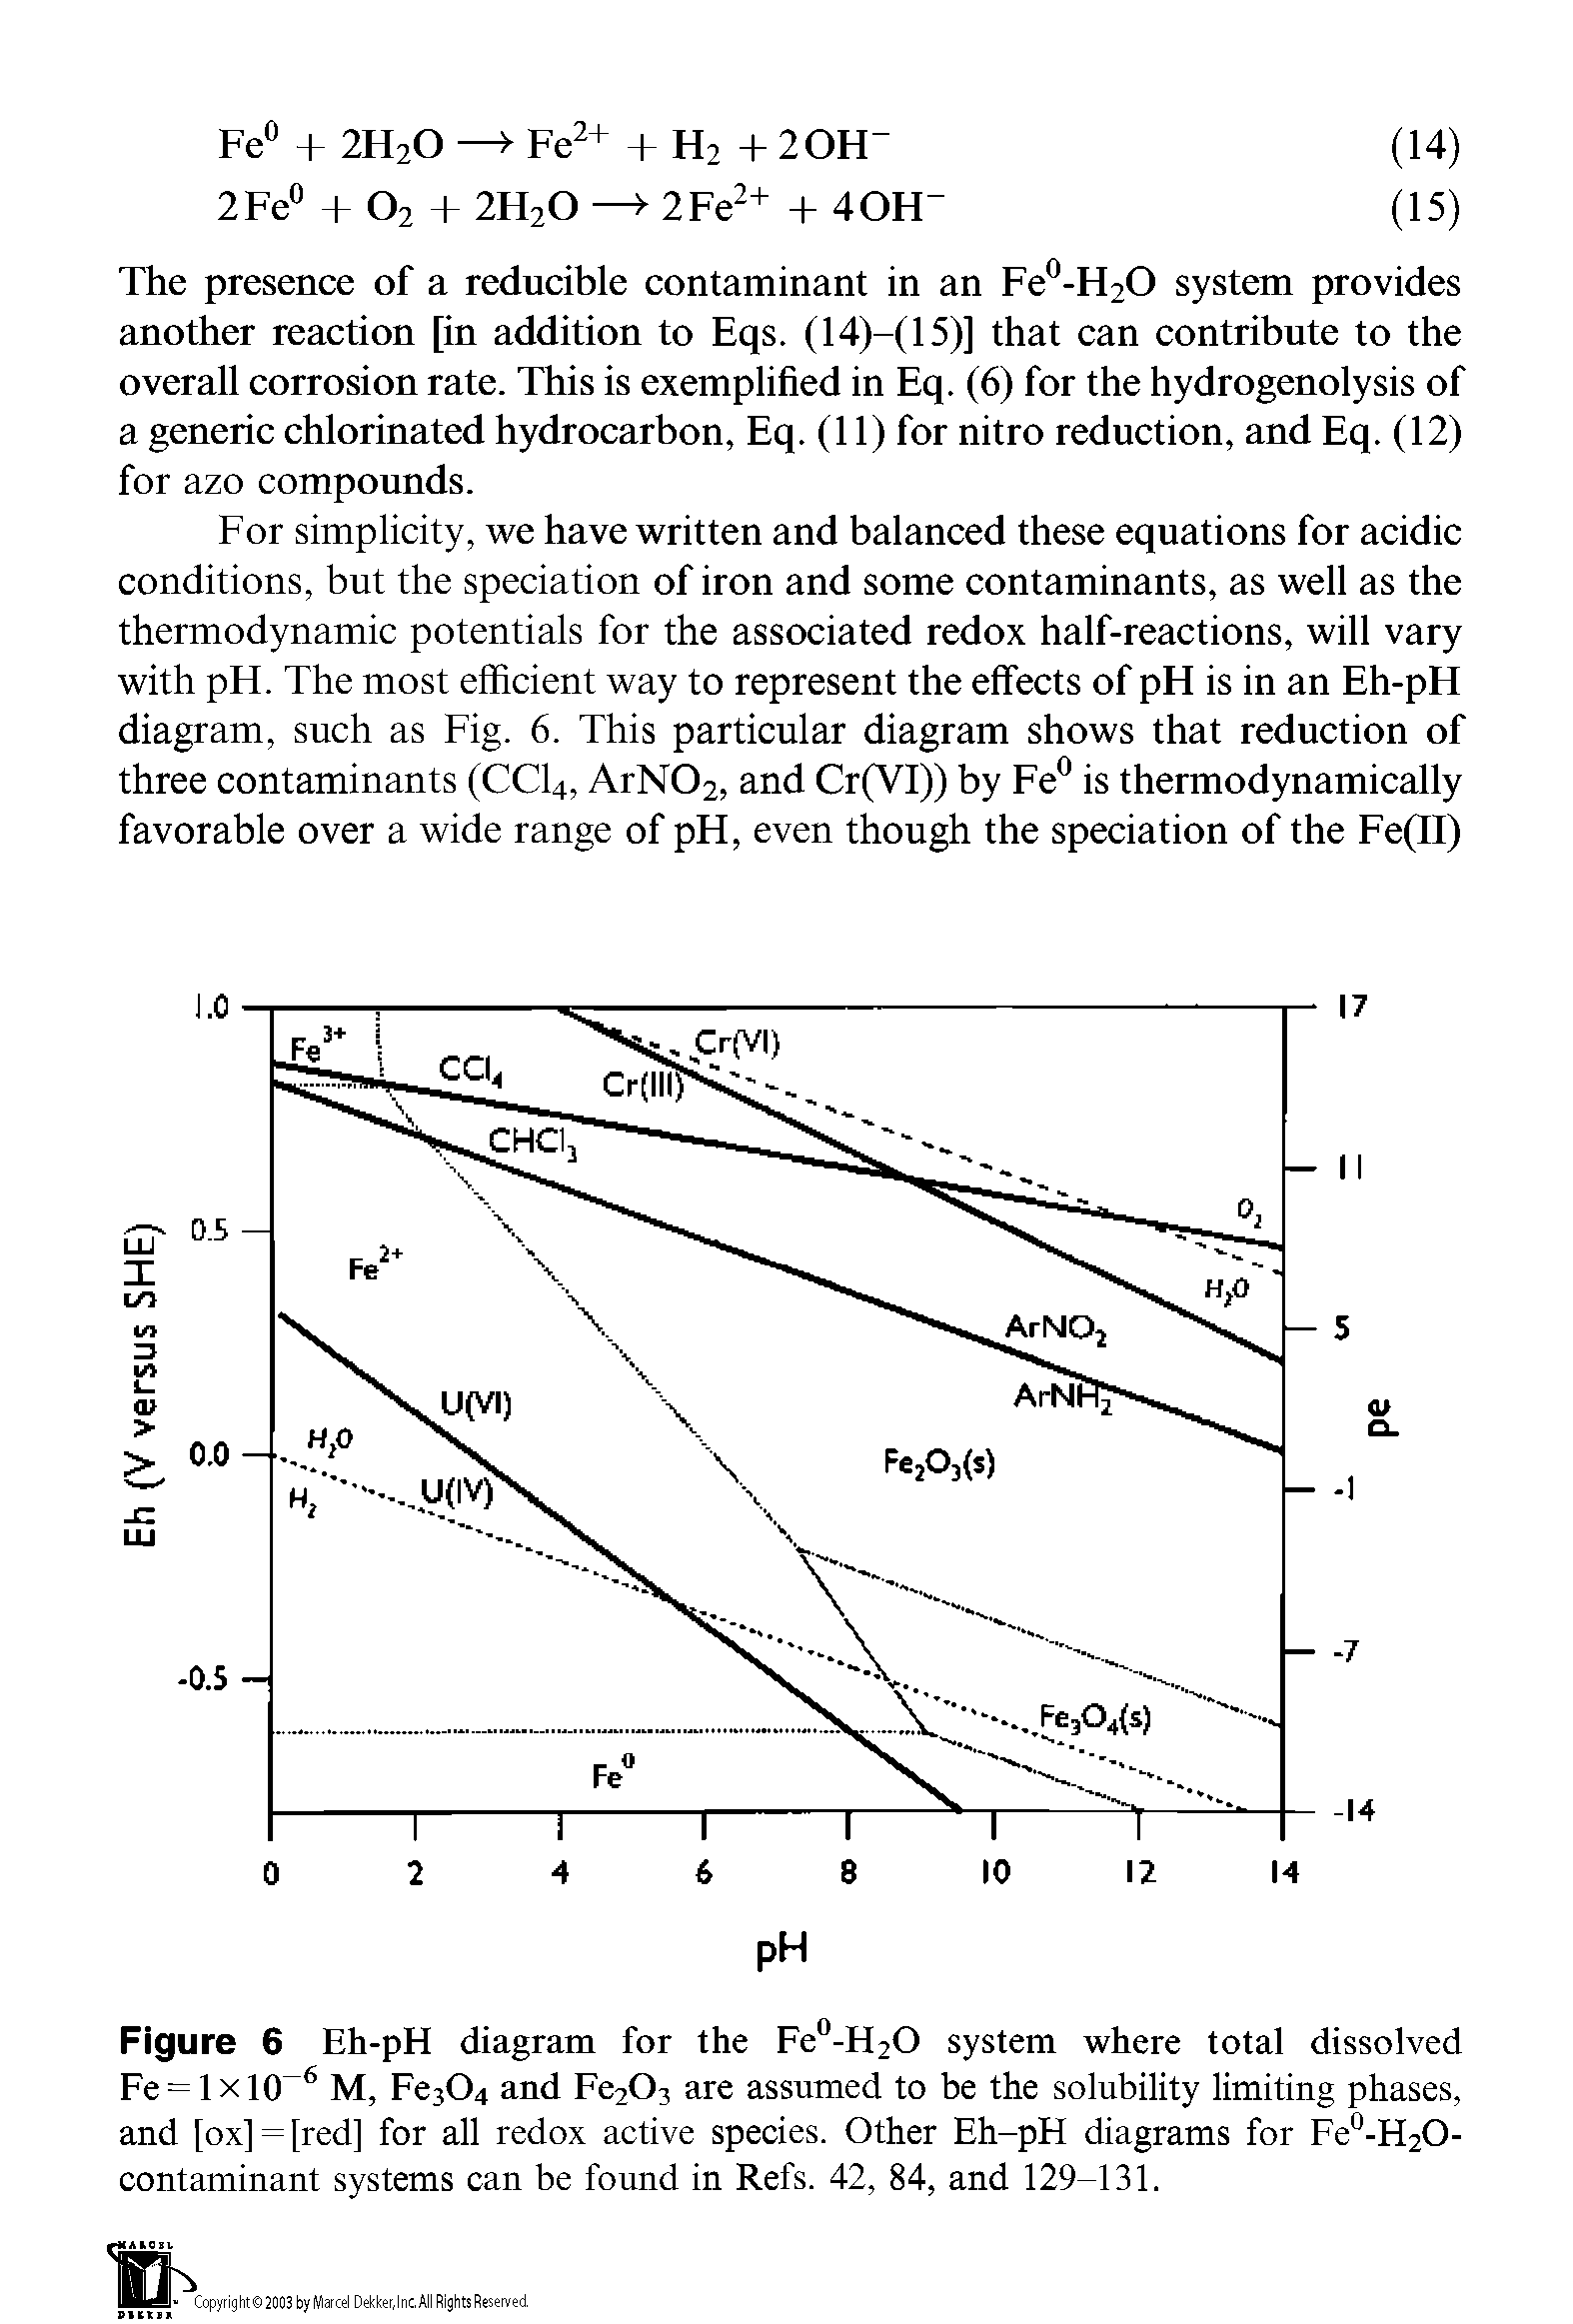 Figure 6 Eh-pH diagram for the Fe0-H2O system where total dissolved Fe = lxlCT6 M, Fe304 and Fe203 are assumed to be the solubility limiting phases, and [ox] = [red] for all redox active species. Other Eh-pH diagrams for Fe0-H2O-contaminant systems can be found in Refs. 42, 84, and 129-131.